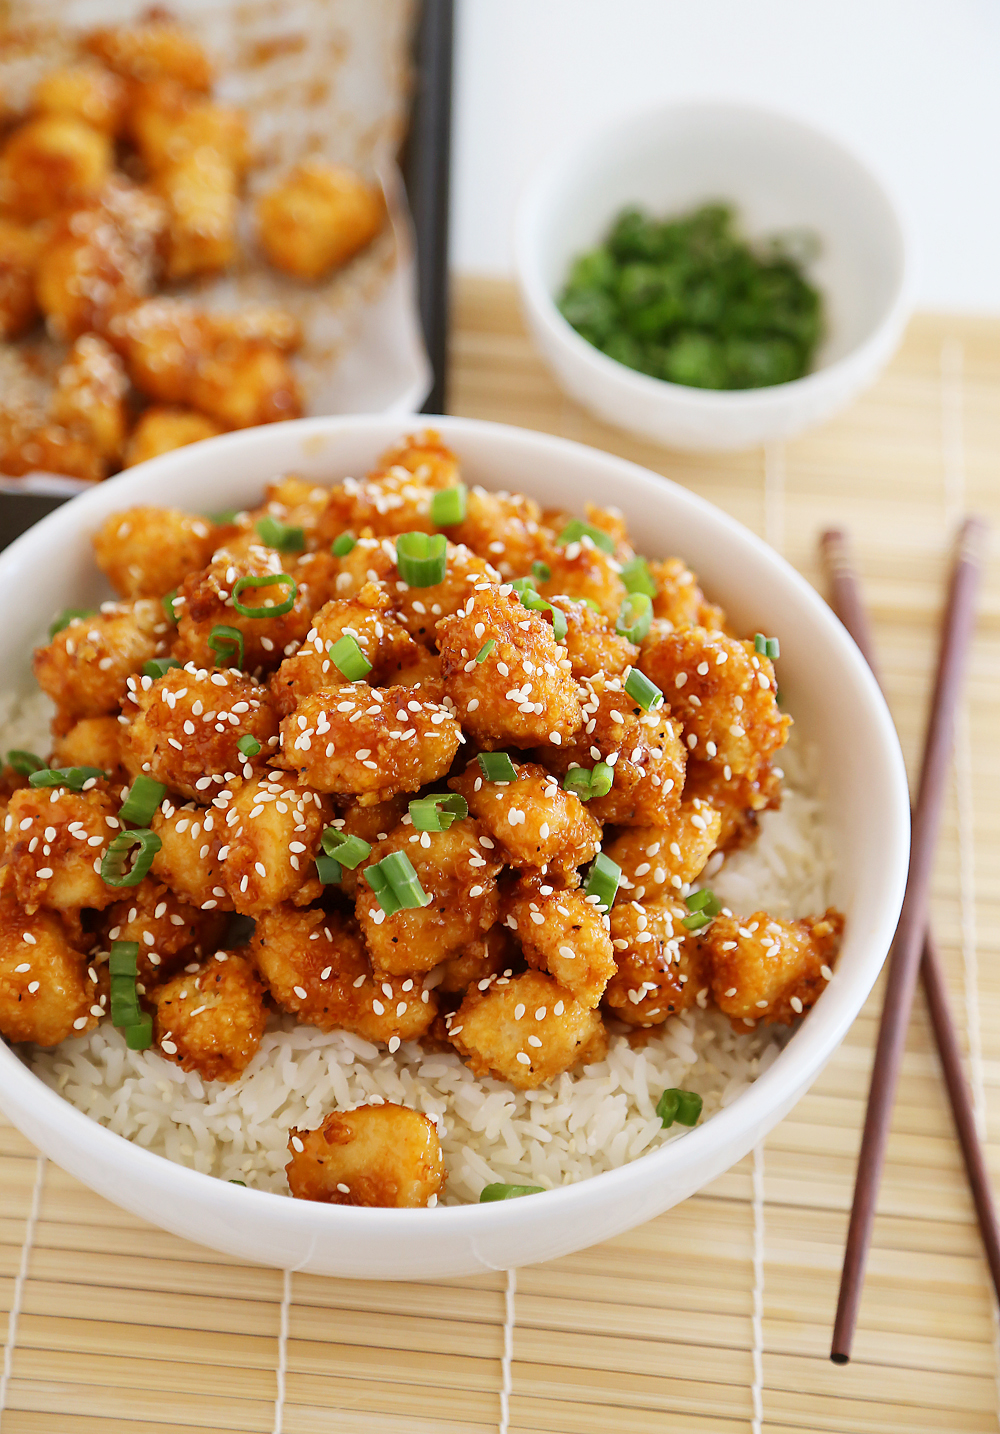 Crispy Baked Honey Garlic Chicken – Chicken bites in a sticky honey-Sriracha sauce are a weeknight meal or party appetizer! Thecomfortofcooking.com